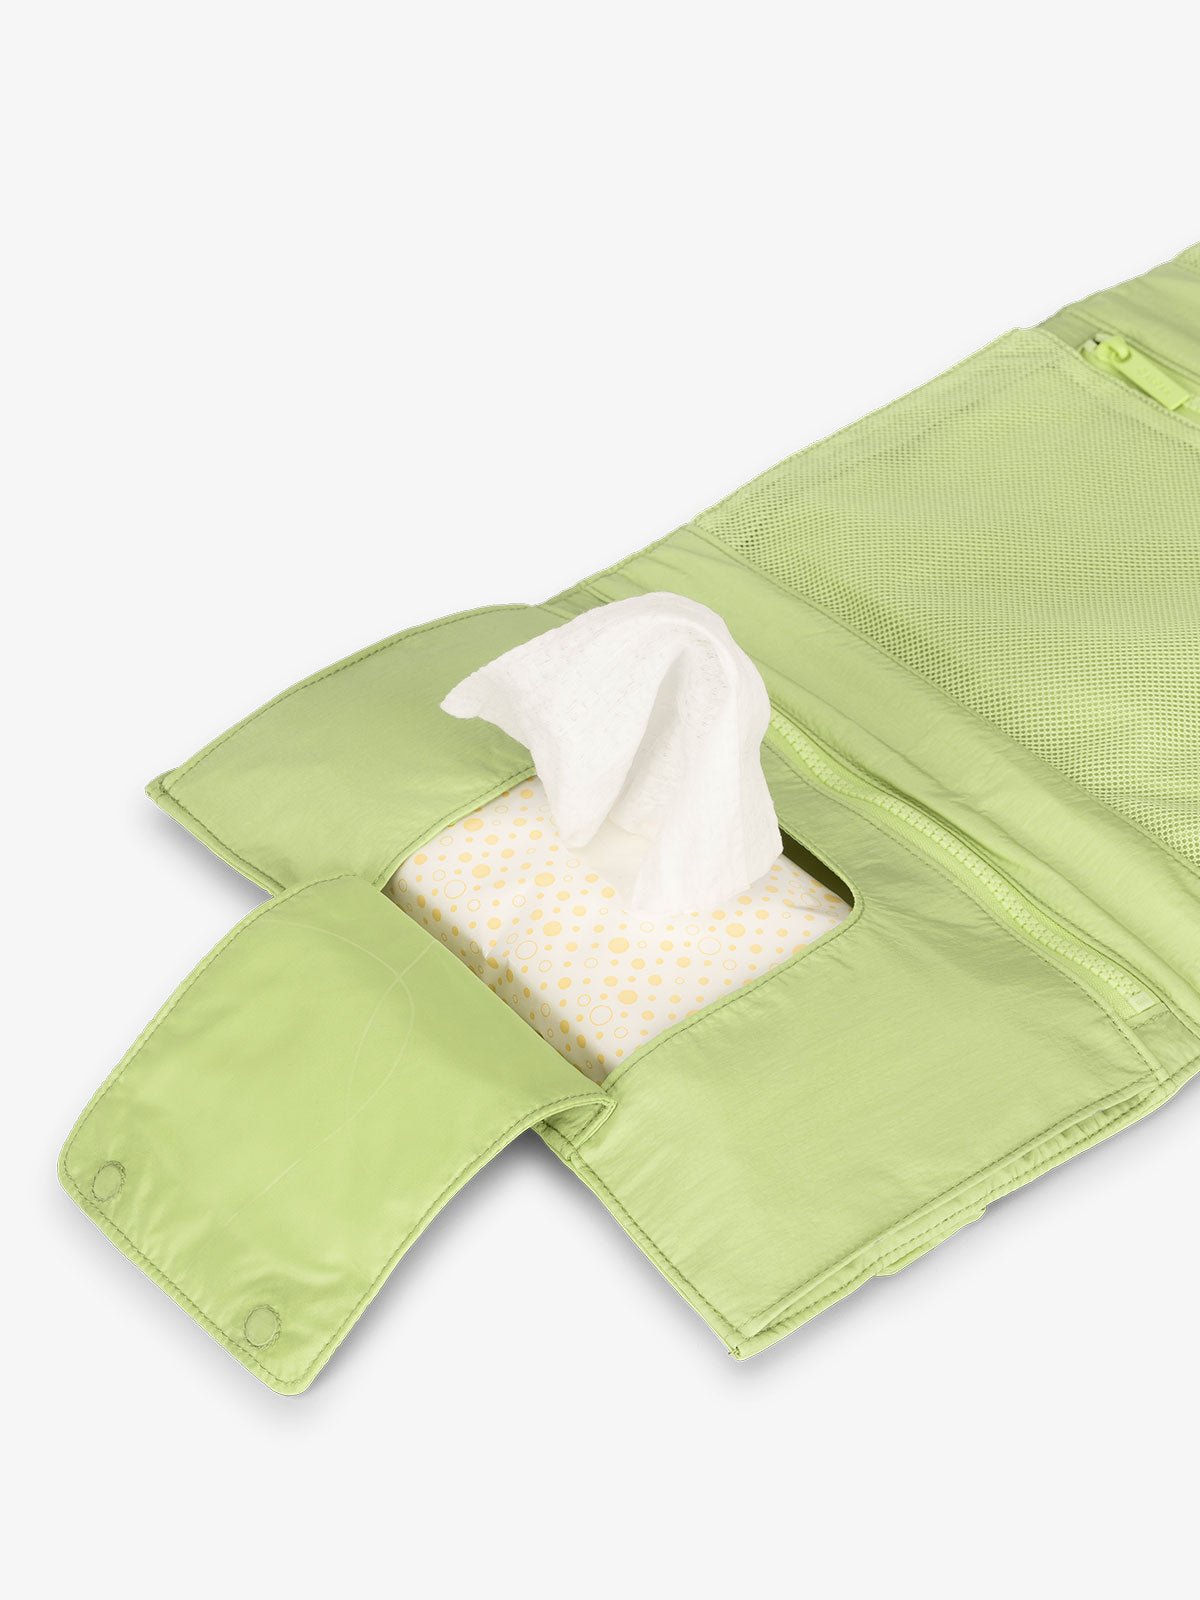 CALPAK portable changing pad clutch with dedicated baby wipe pocket in lime green